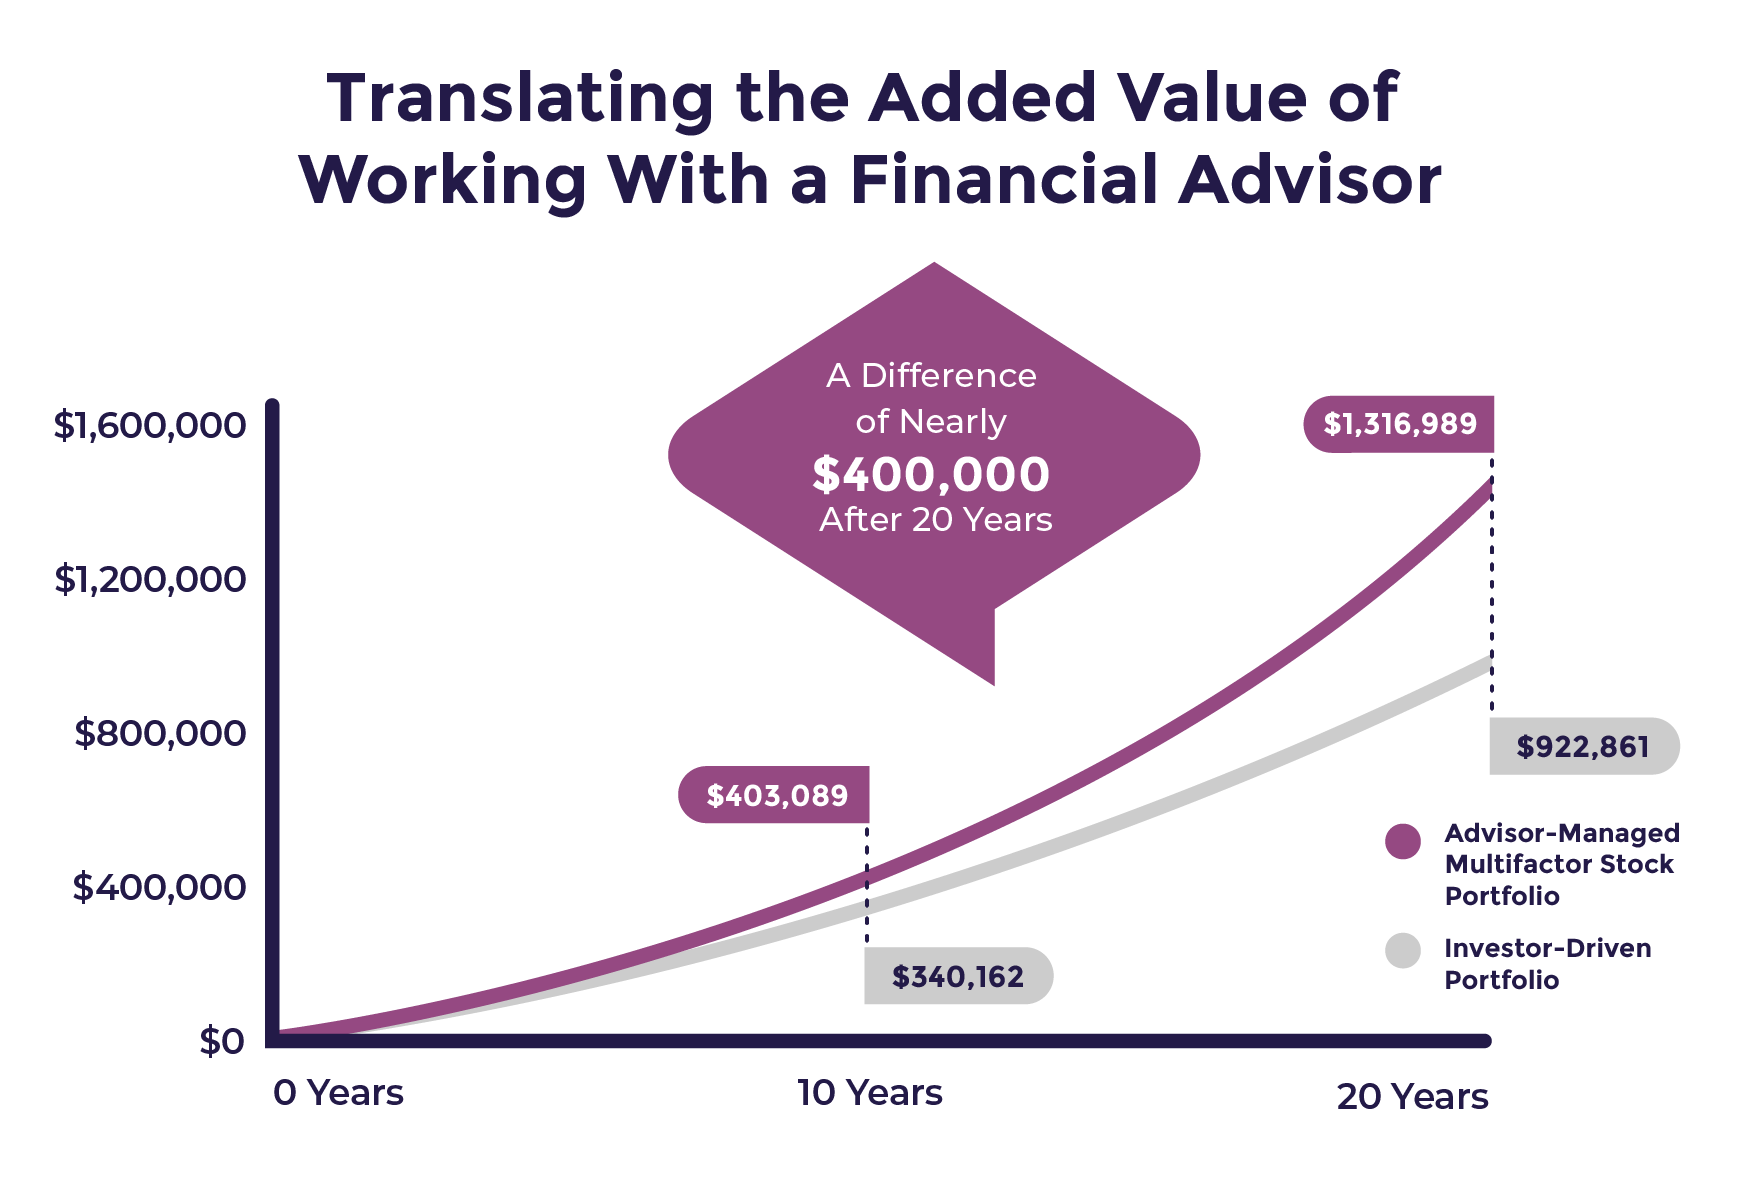 Chart on the Added Value of Working With a Financial Advisor With a Difference of Nearly $400,000 After 20 Years